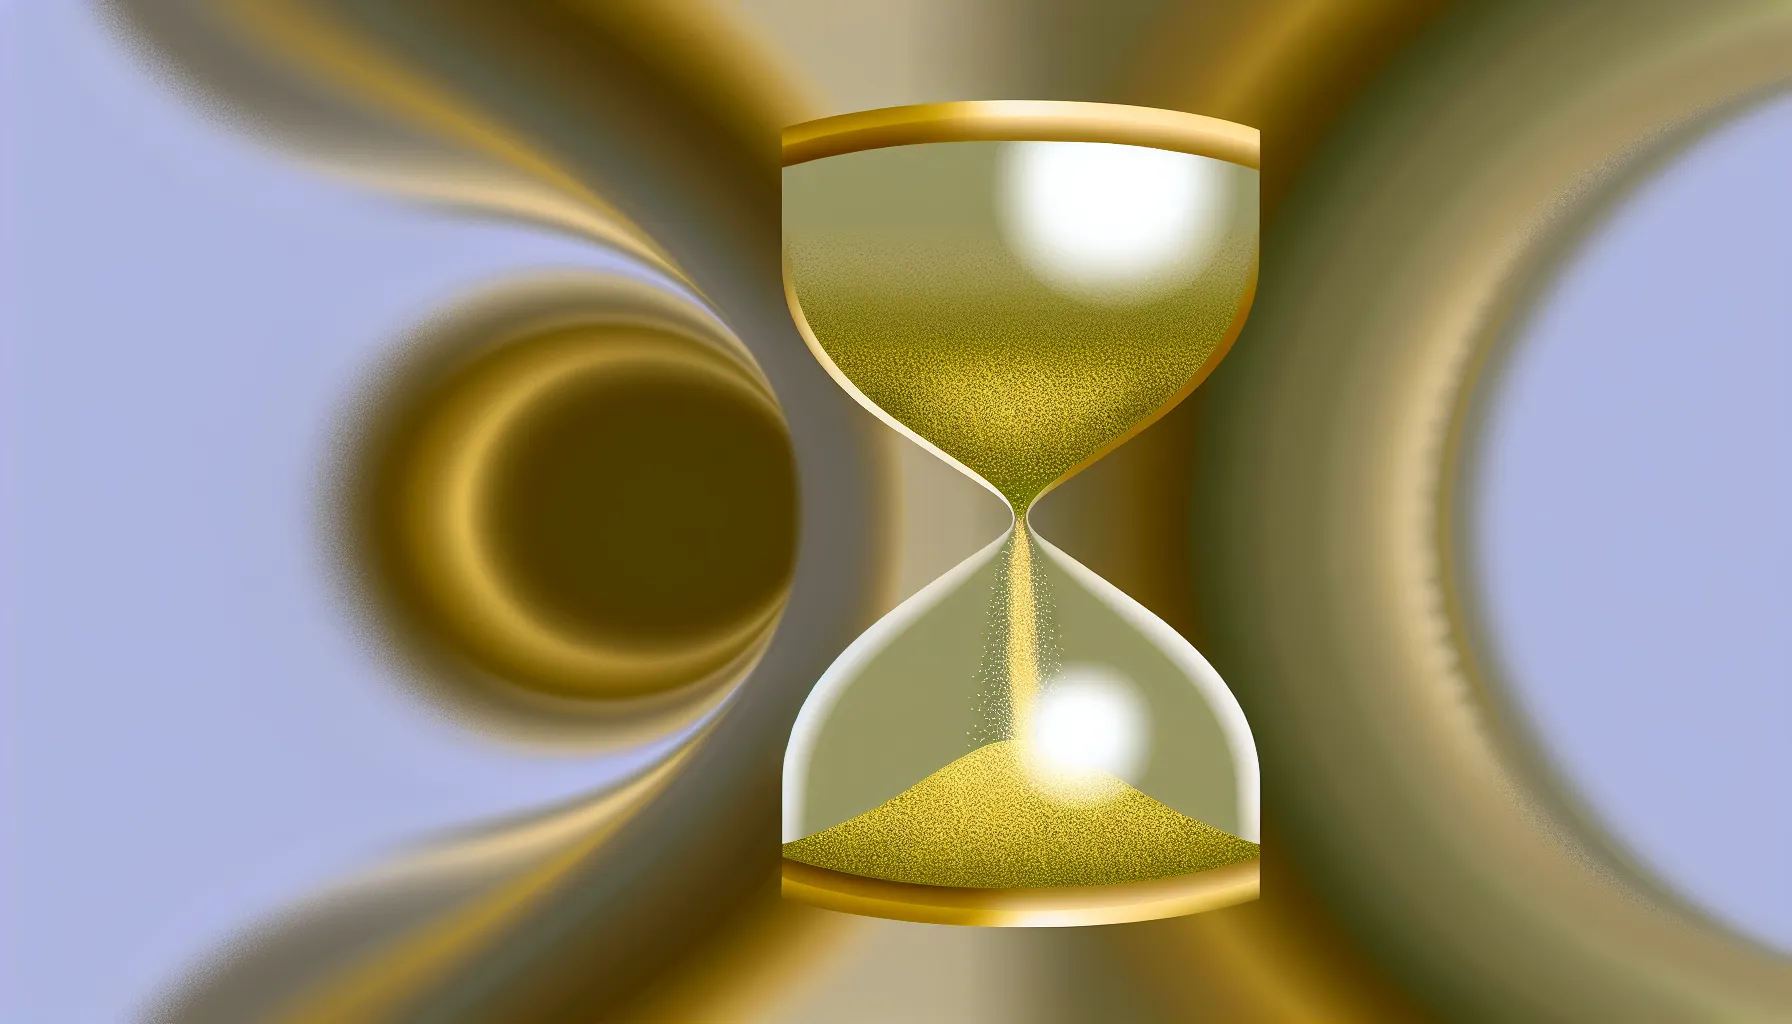 Artistic representation of time passage